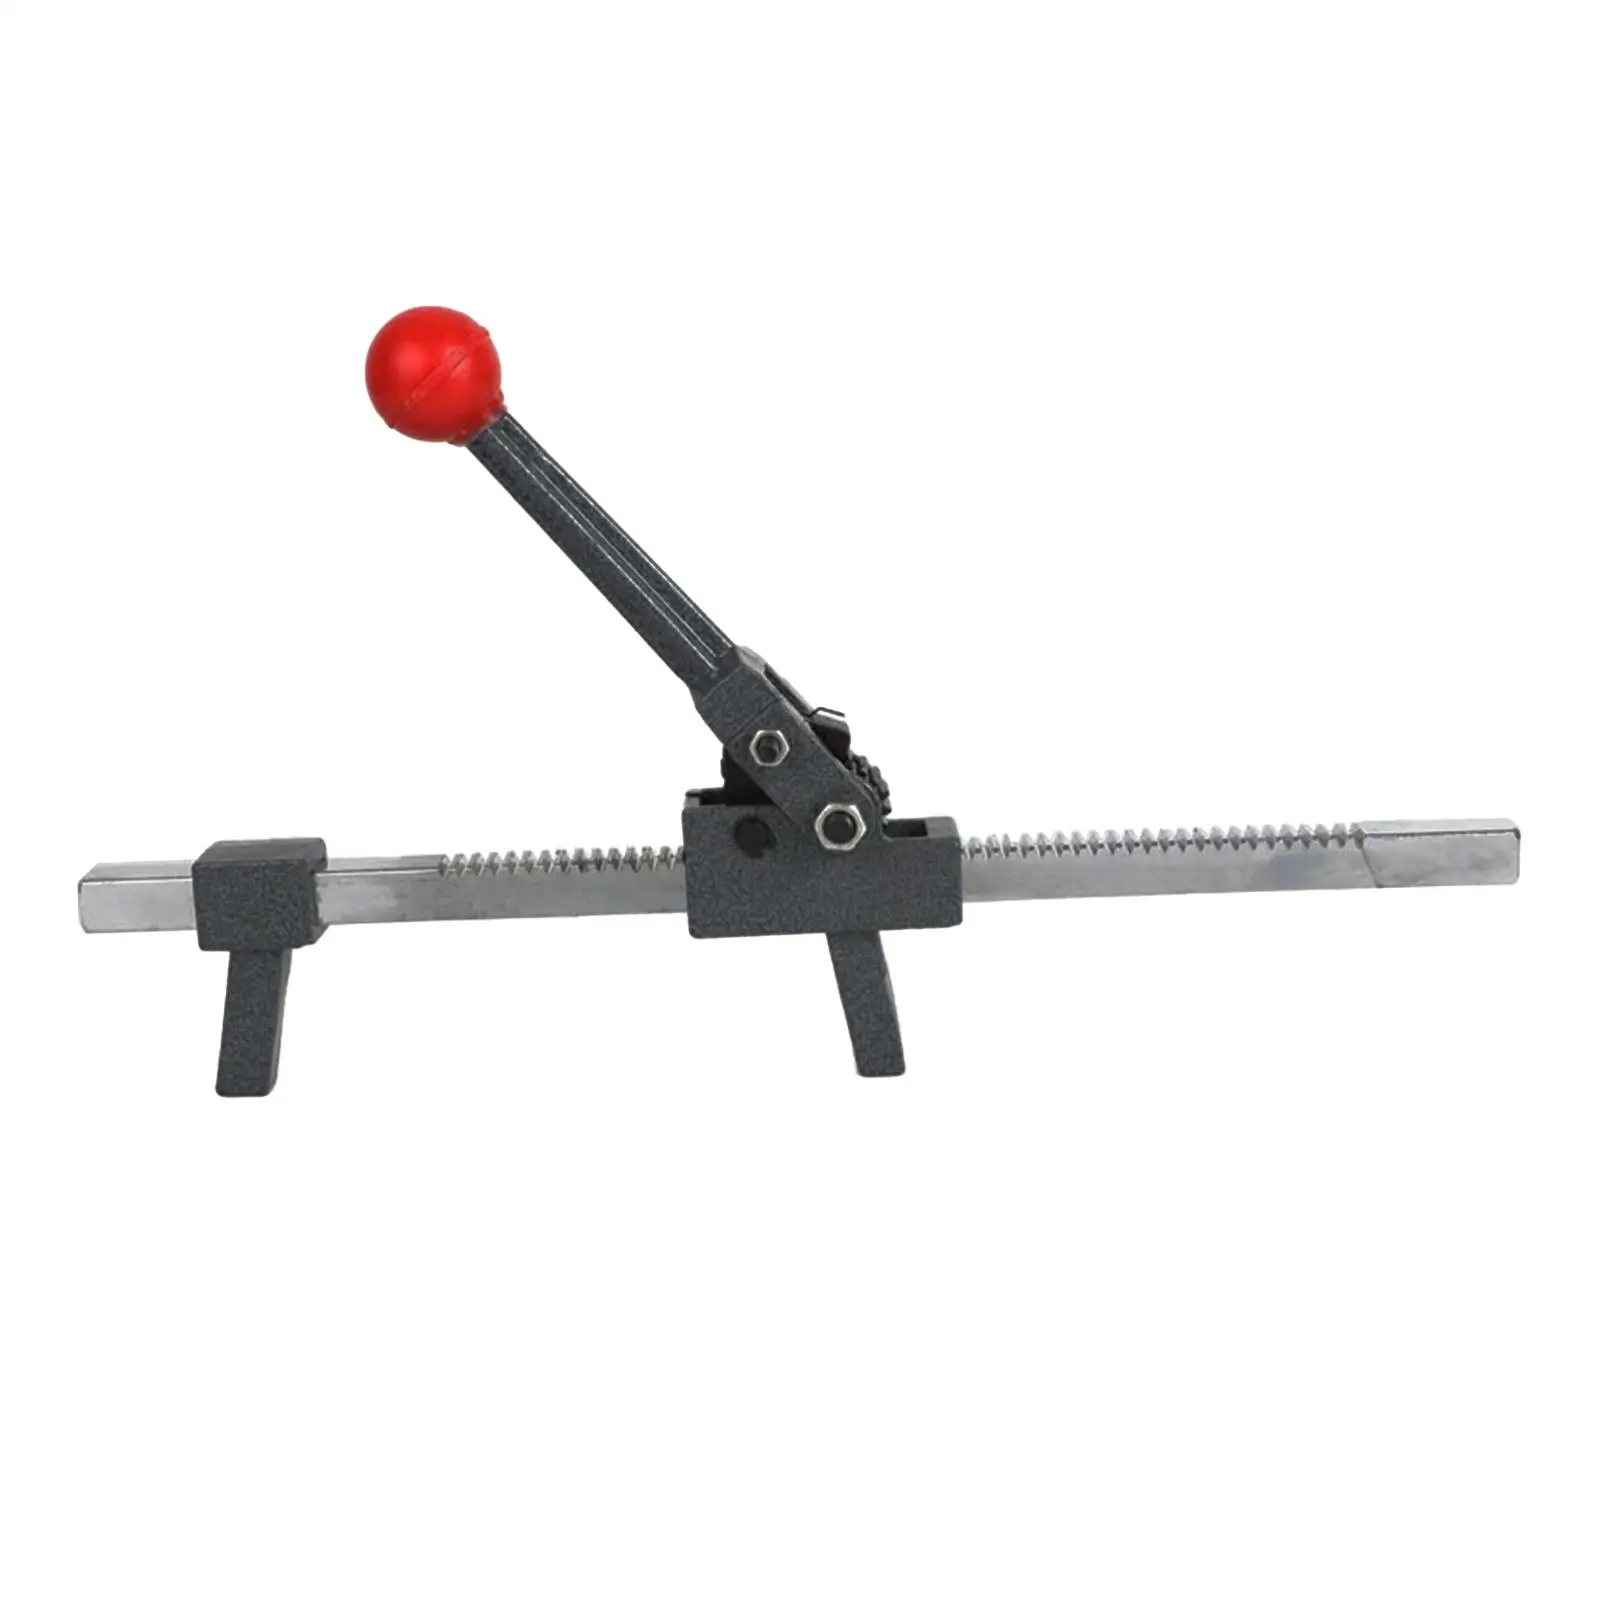 Manual Tire Changer Replaces Bead Breaker Steel Spare Parts Durable for Small Auto Shop Motorcycle Car Accessories Mounting Tool